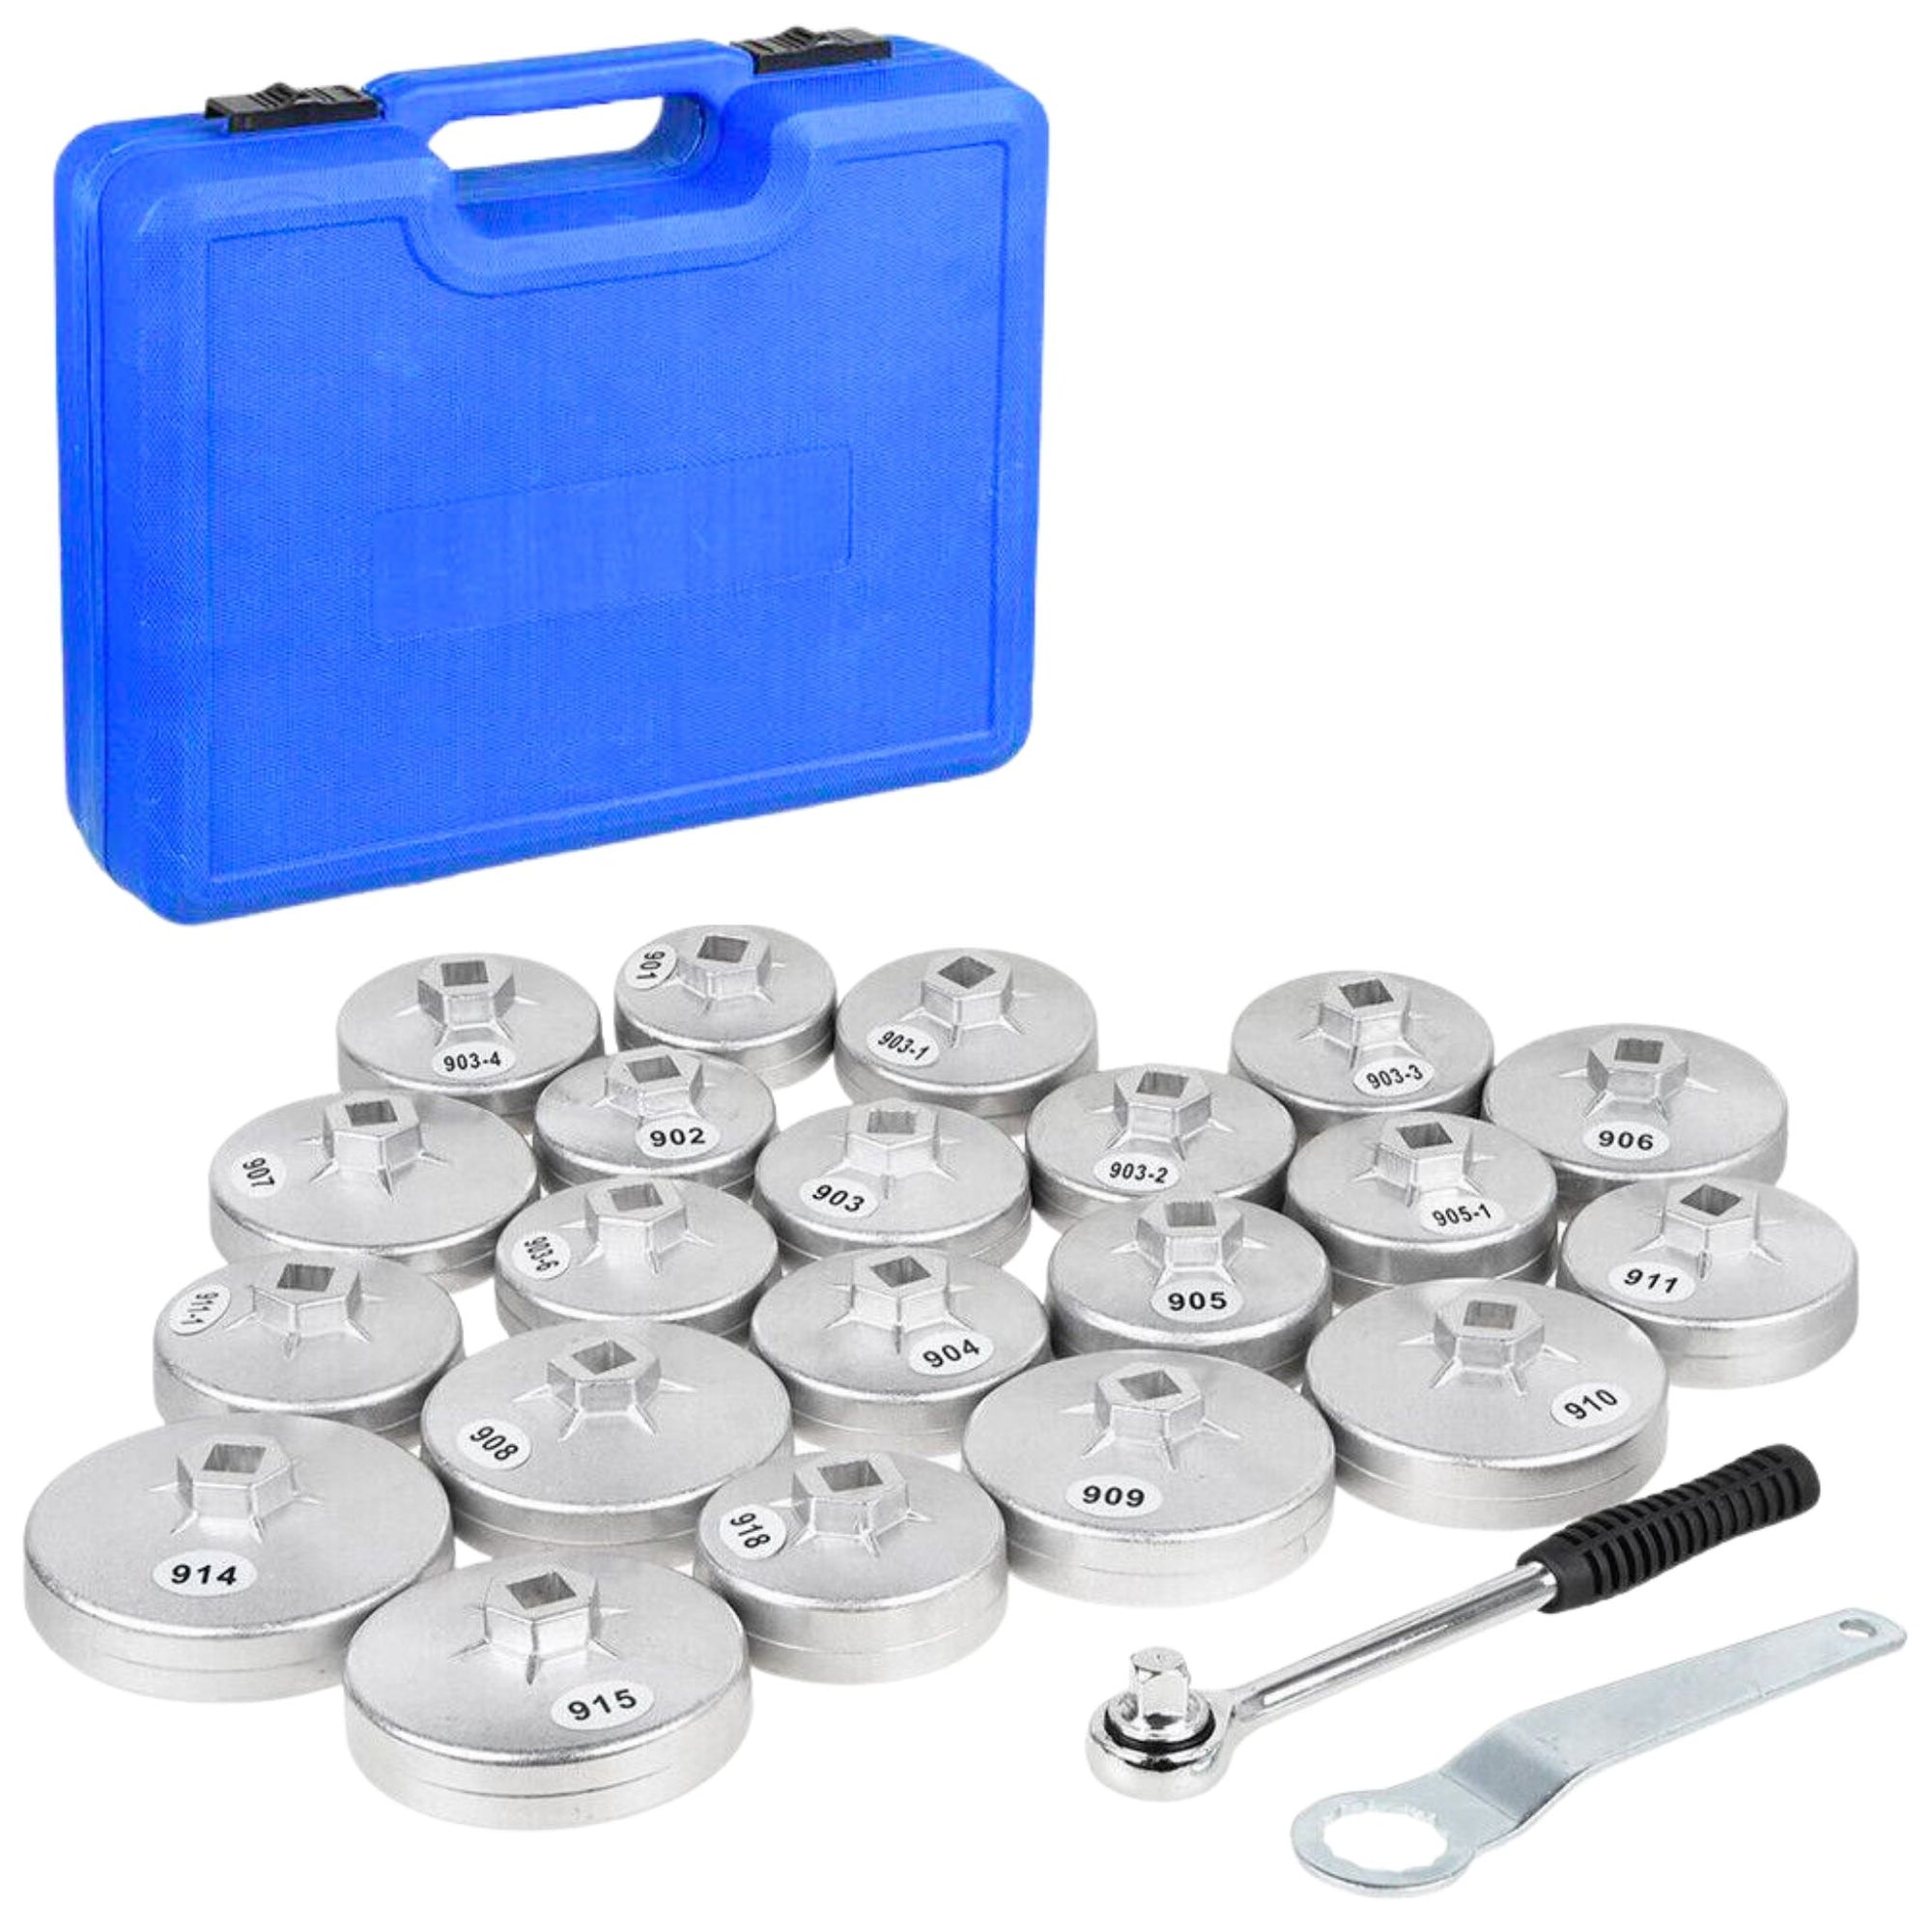 23 Piece Cup Type Aluminium Oil Filter Wrench Removal Socket Set - South East Clearance Centre